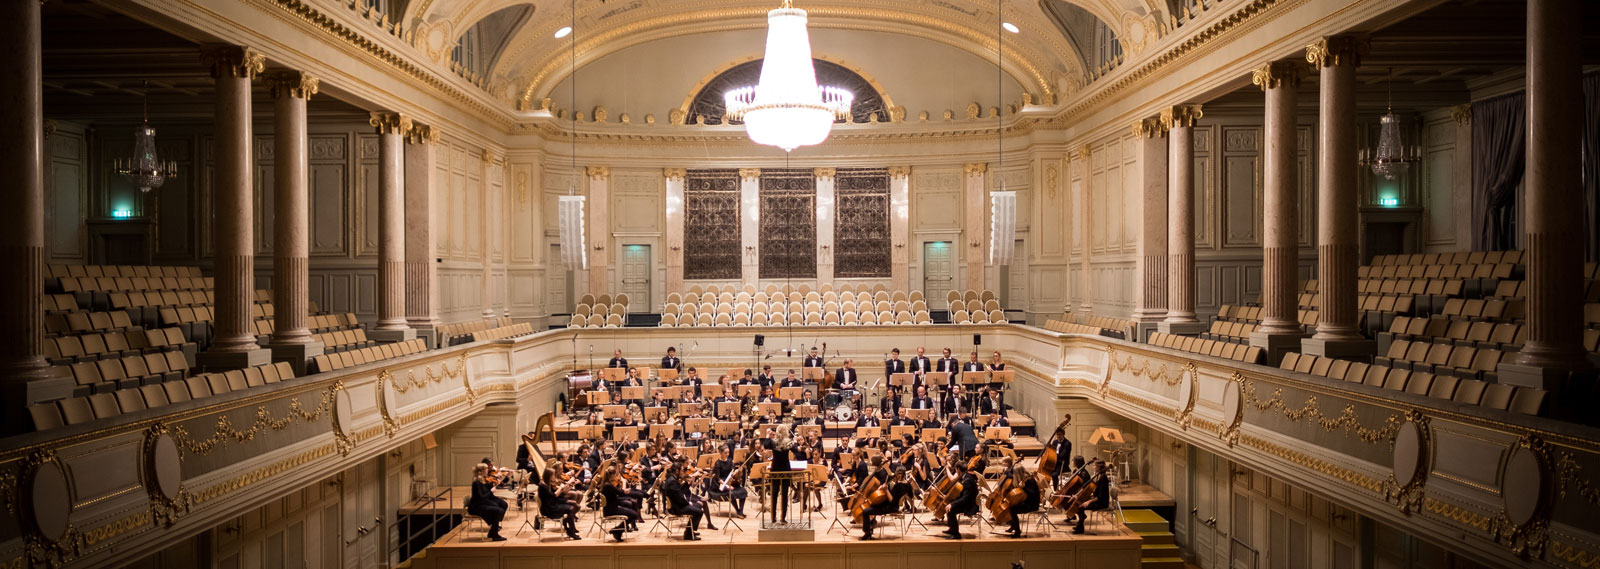 Picture of a concert hall with an orchestra inside